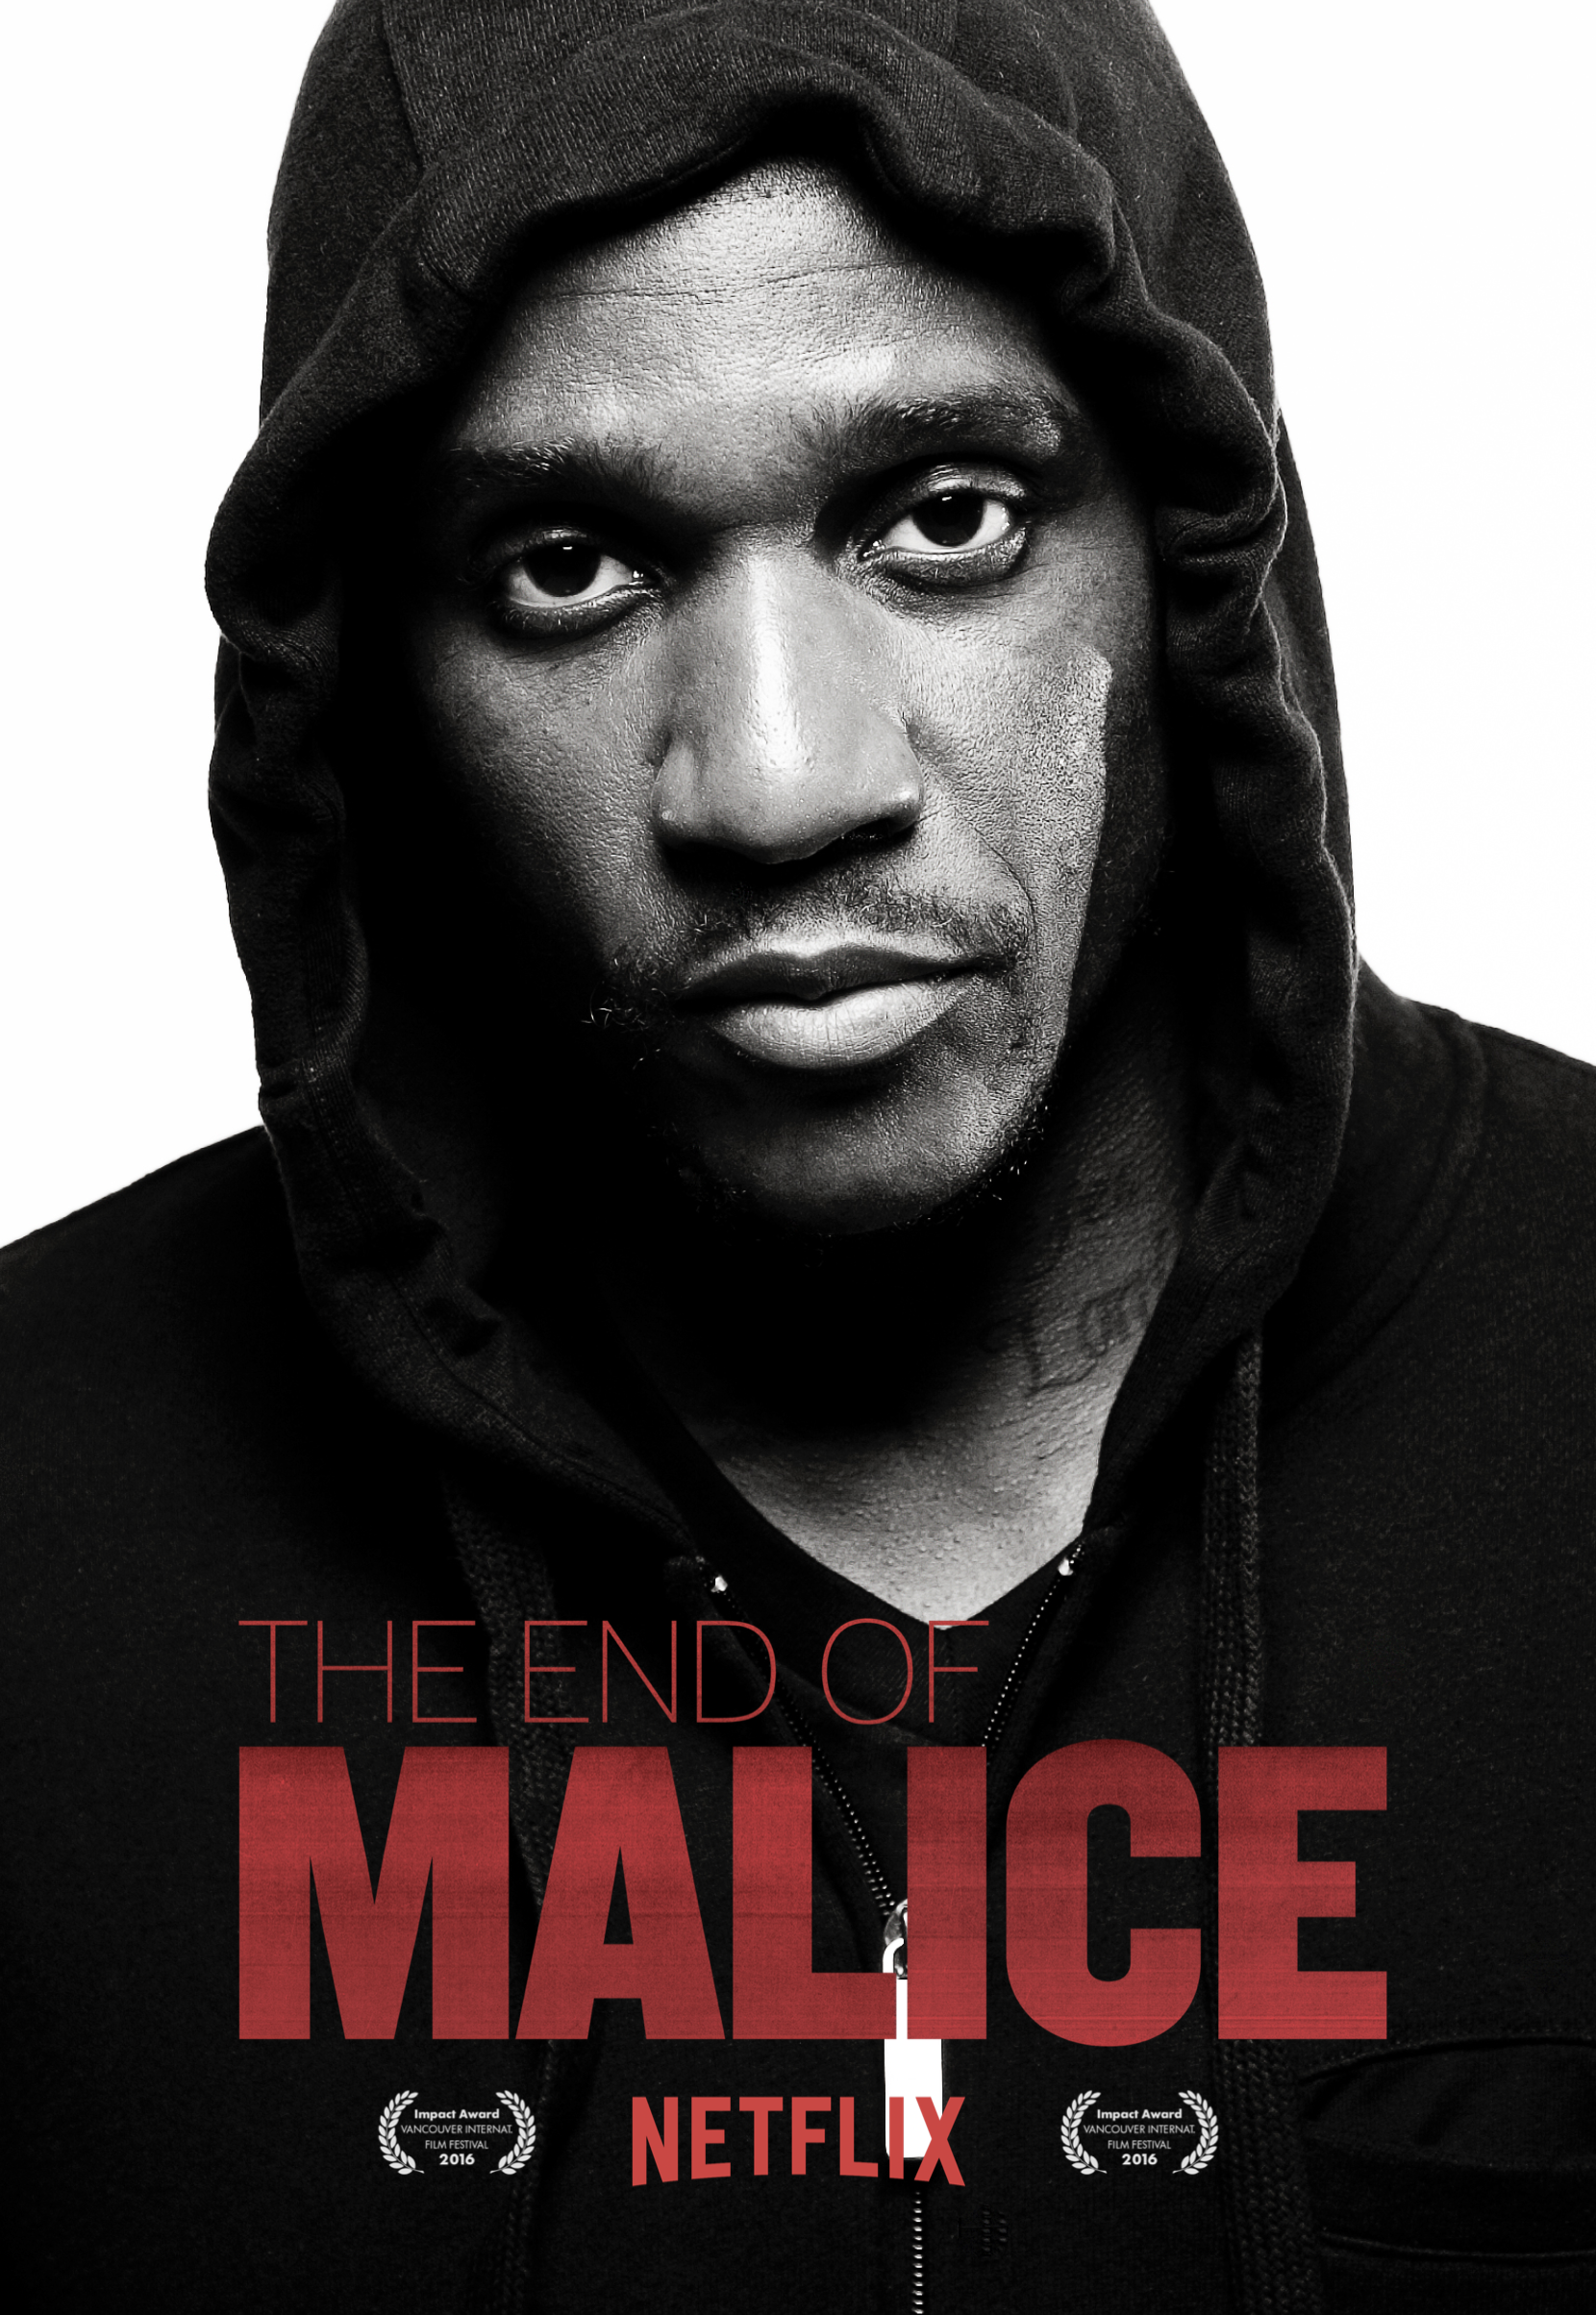 THE END OF MALICE